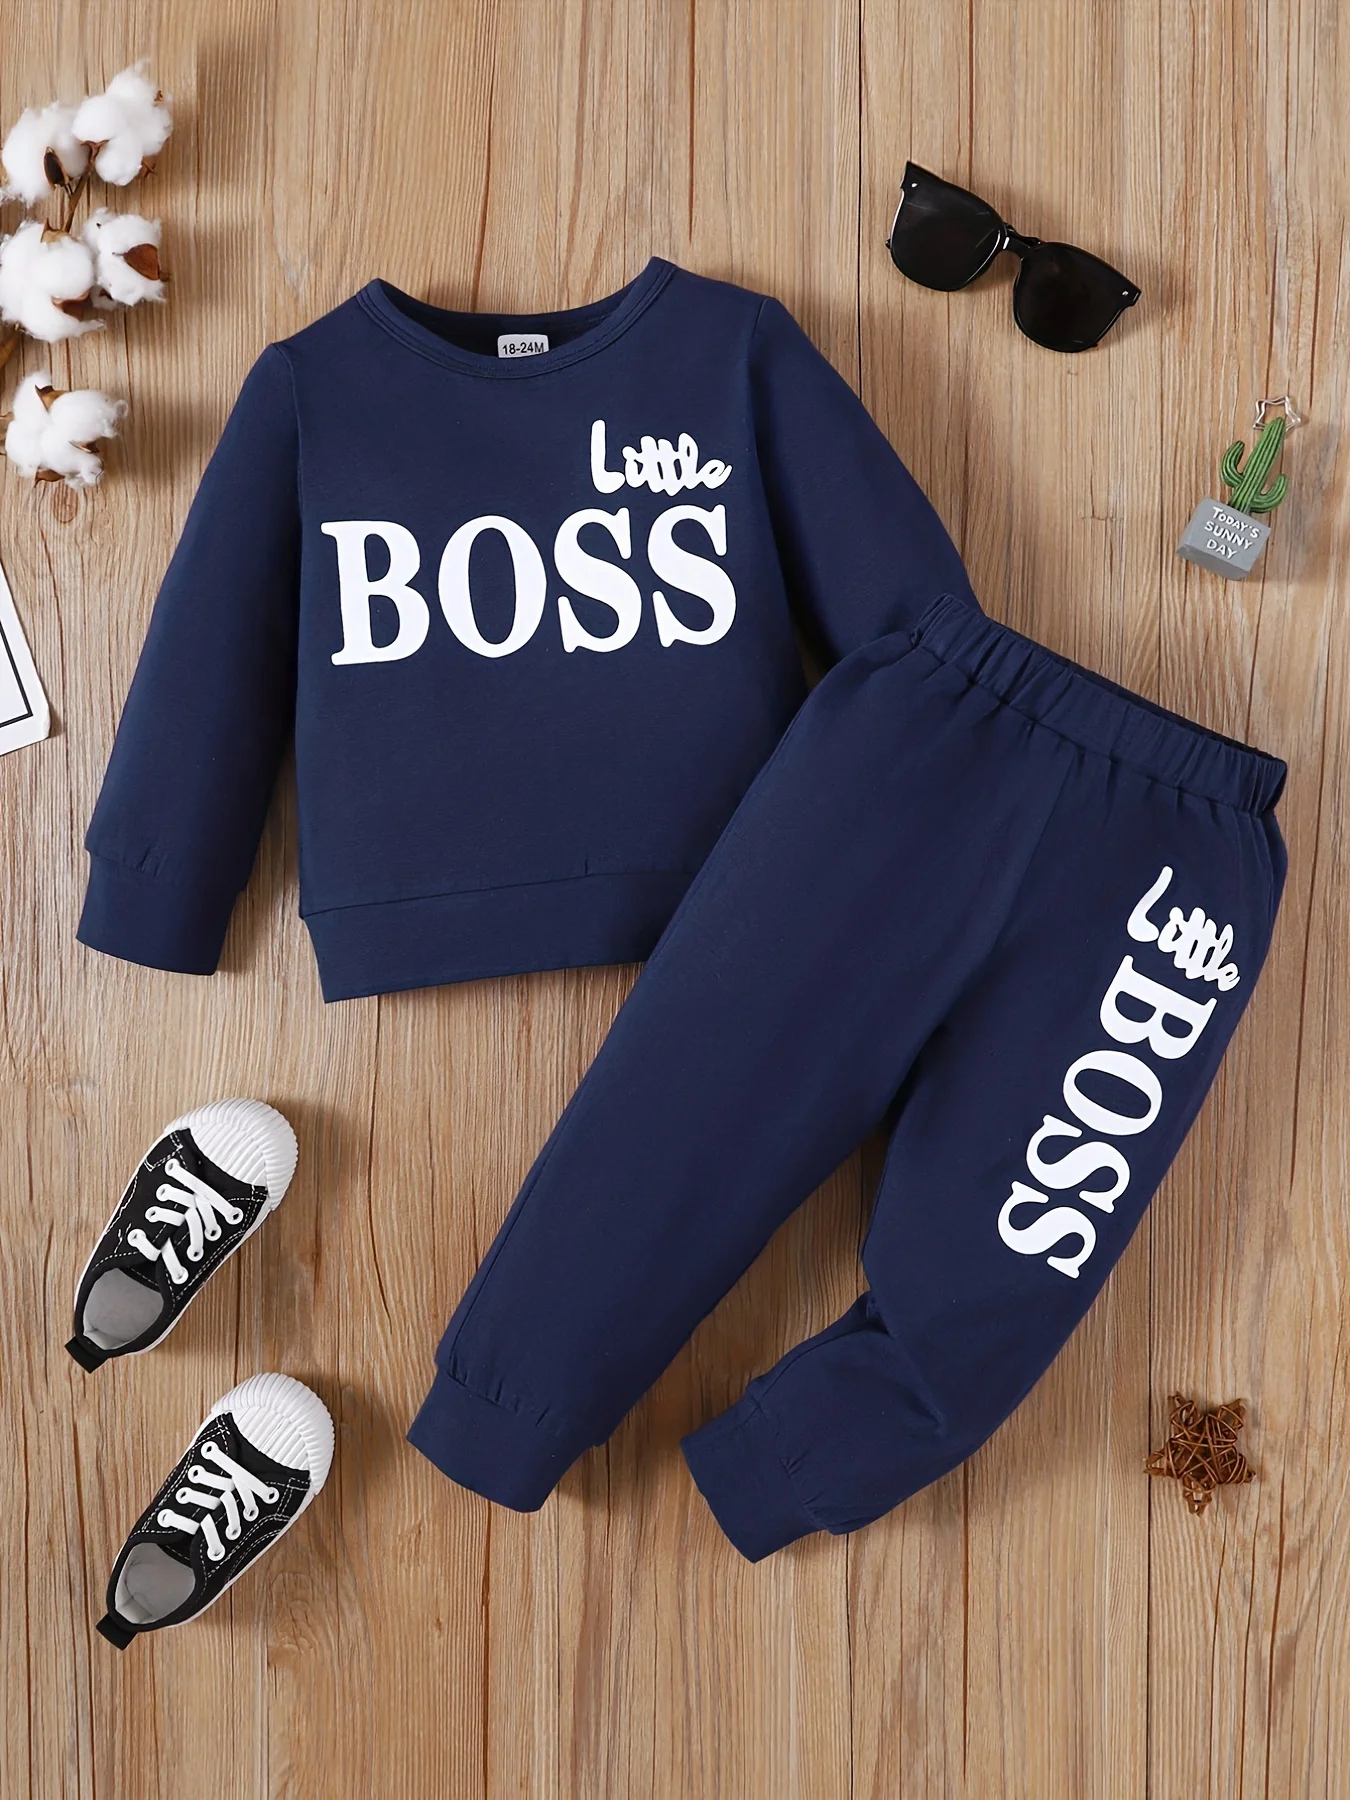 Clothes Set for Kids Boy 1-6 Years Solid Long Sleeves Little BOSS Top+Pants Costume Spring Autumn Children Boy Casual Outfit